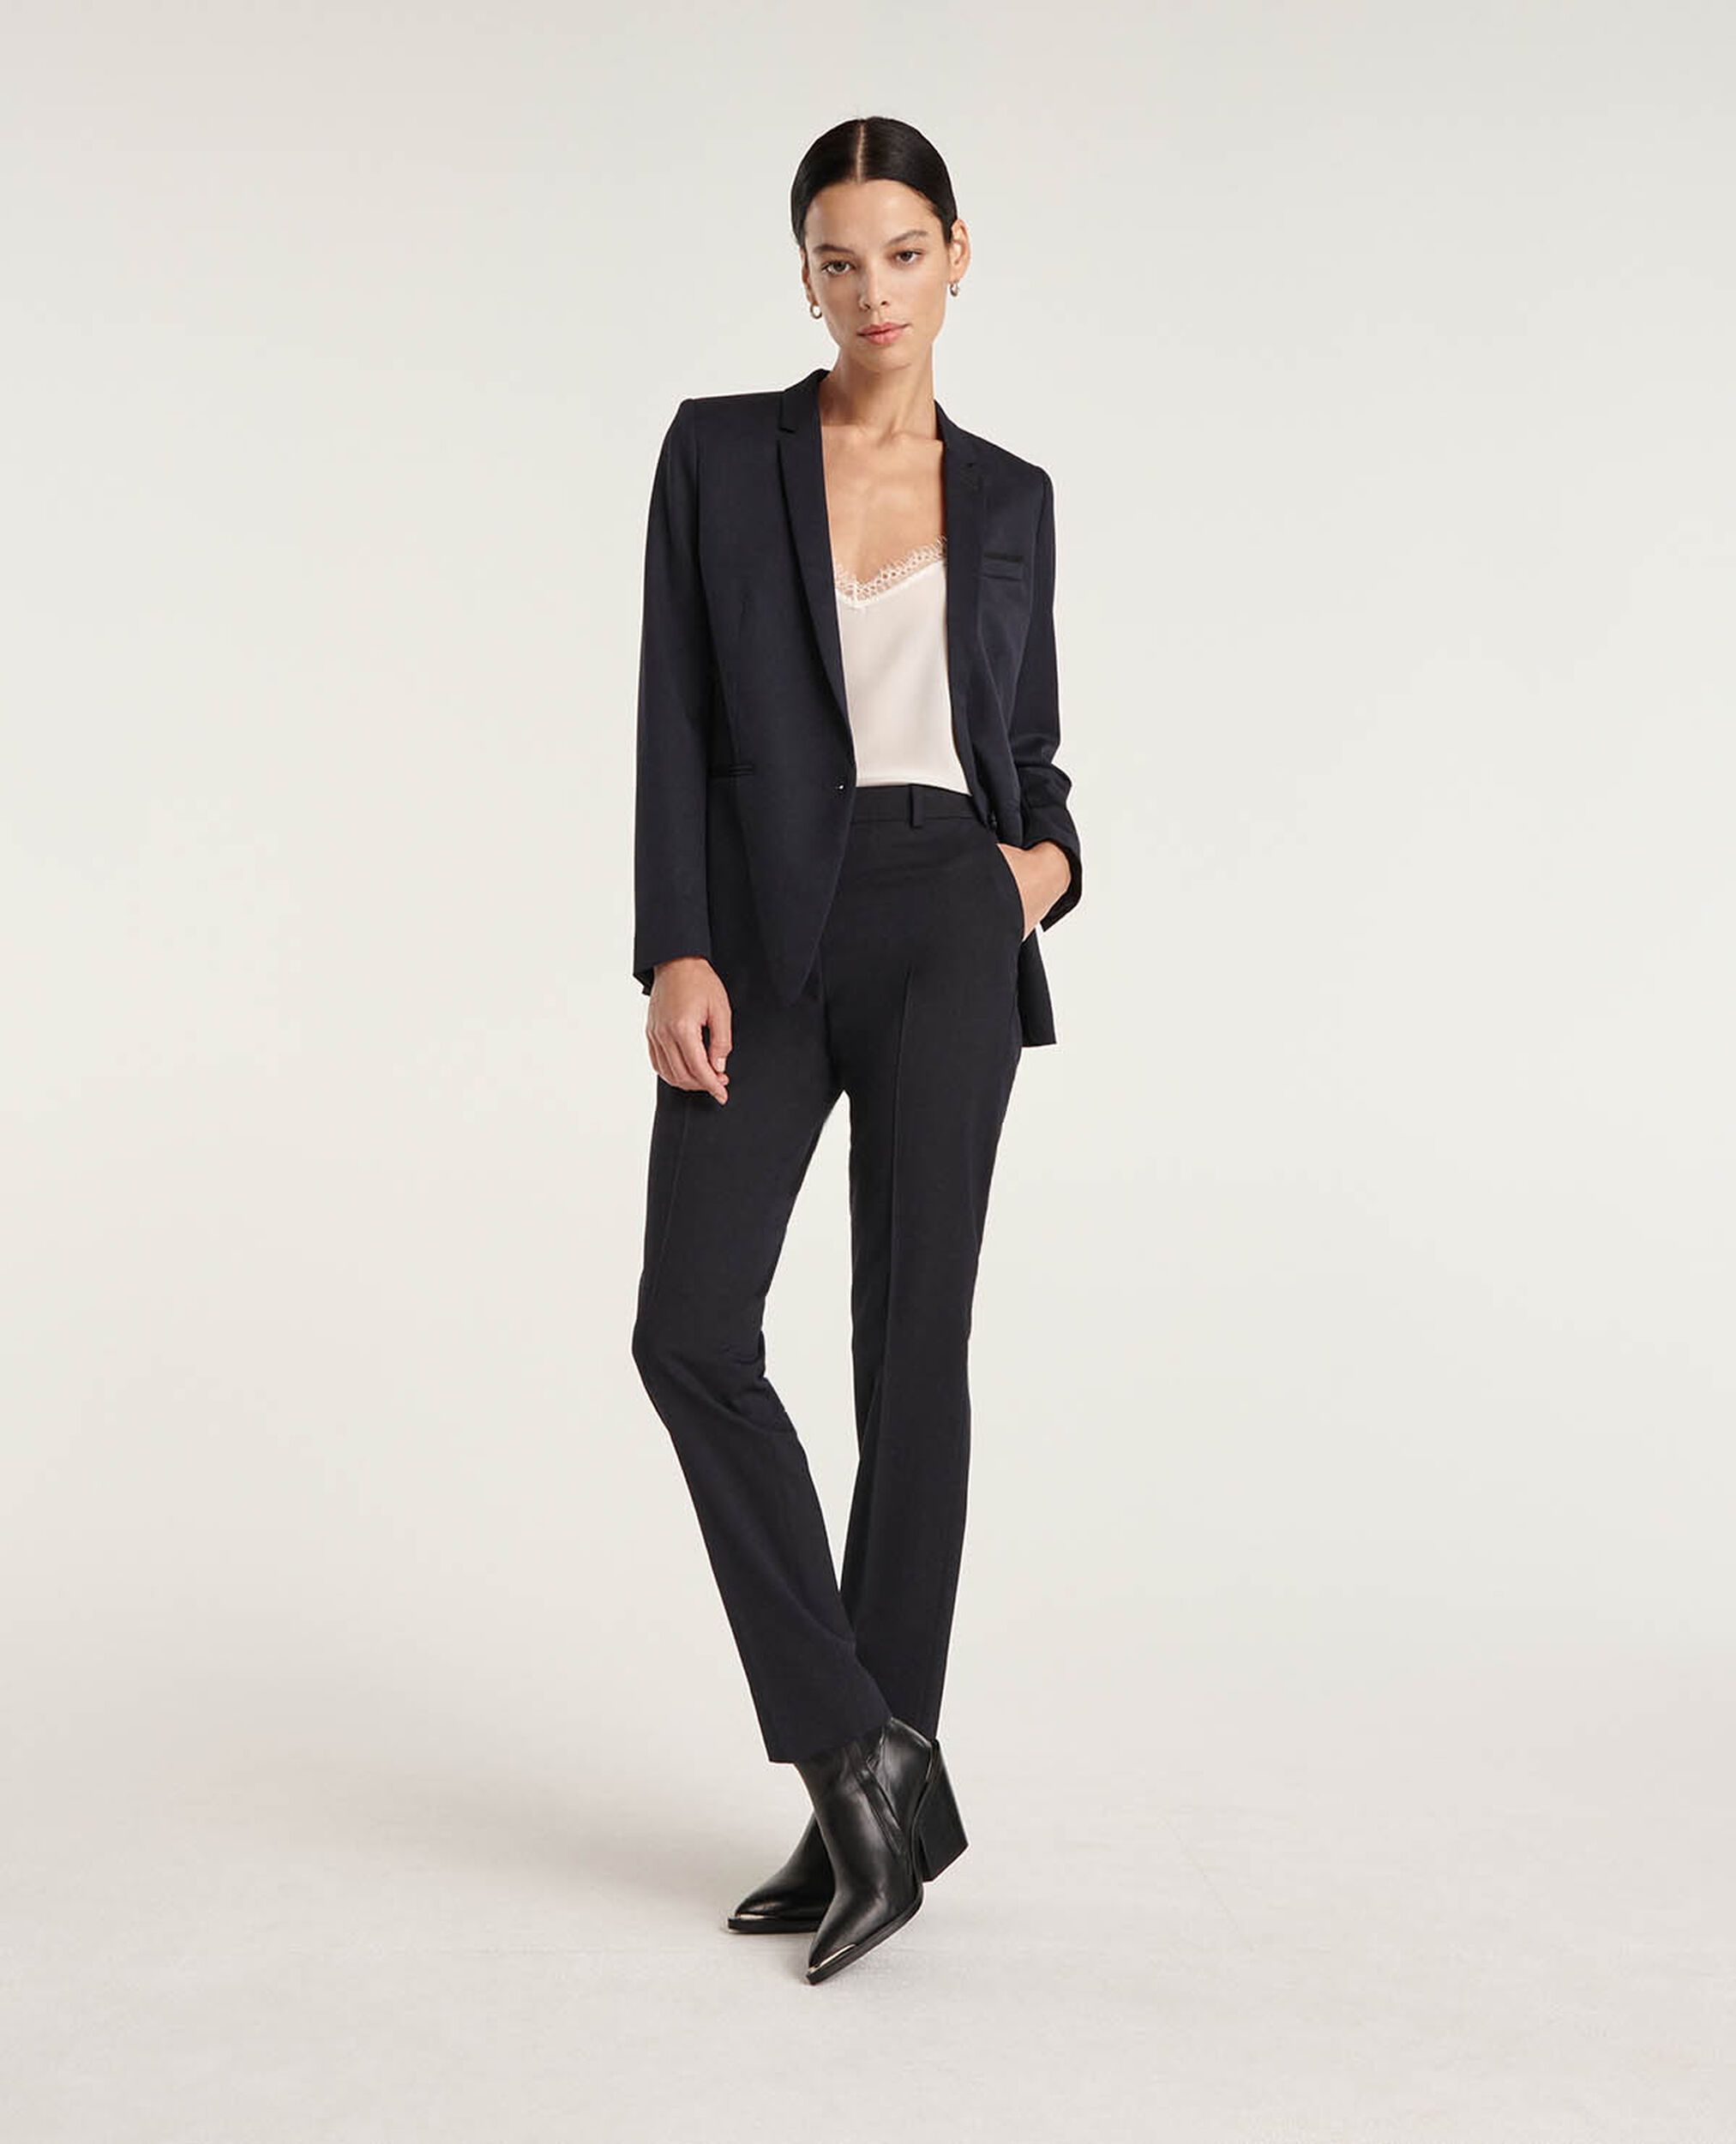 Navy Blue Pantsuit with Navy Blue Shirt